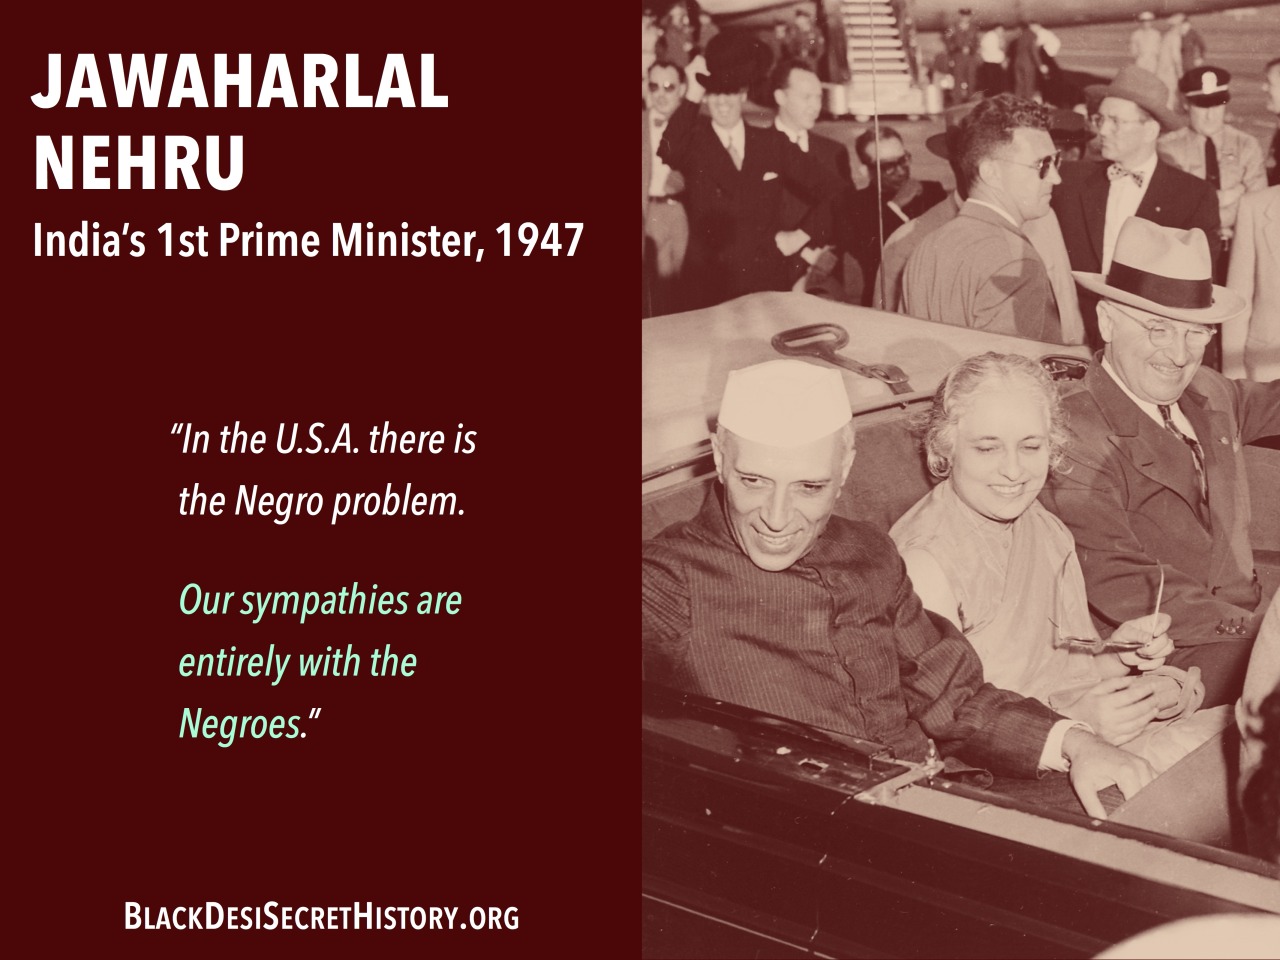 JAWAHARLAL NEHRU, India’s 1st Prime Minister, 1947: “In the U.S.A. there is the Negro problem. Our sympathies are entirely with the Negroes.”